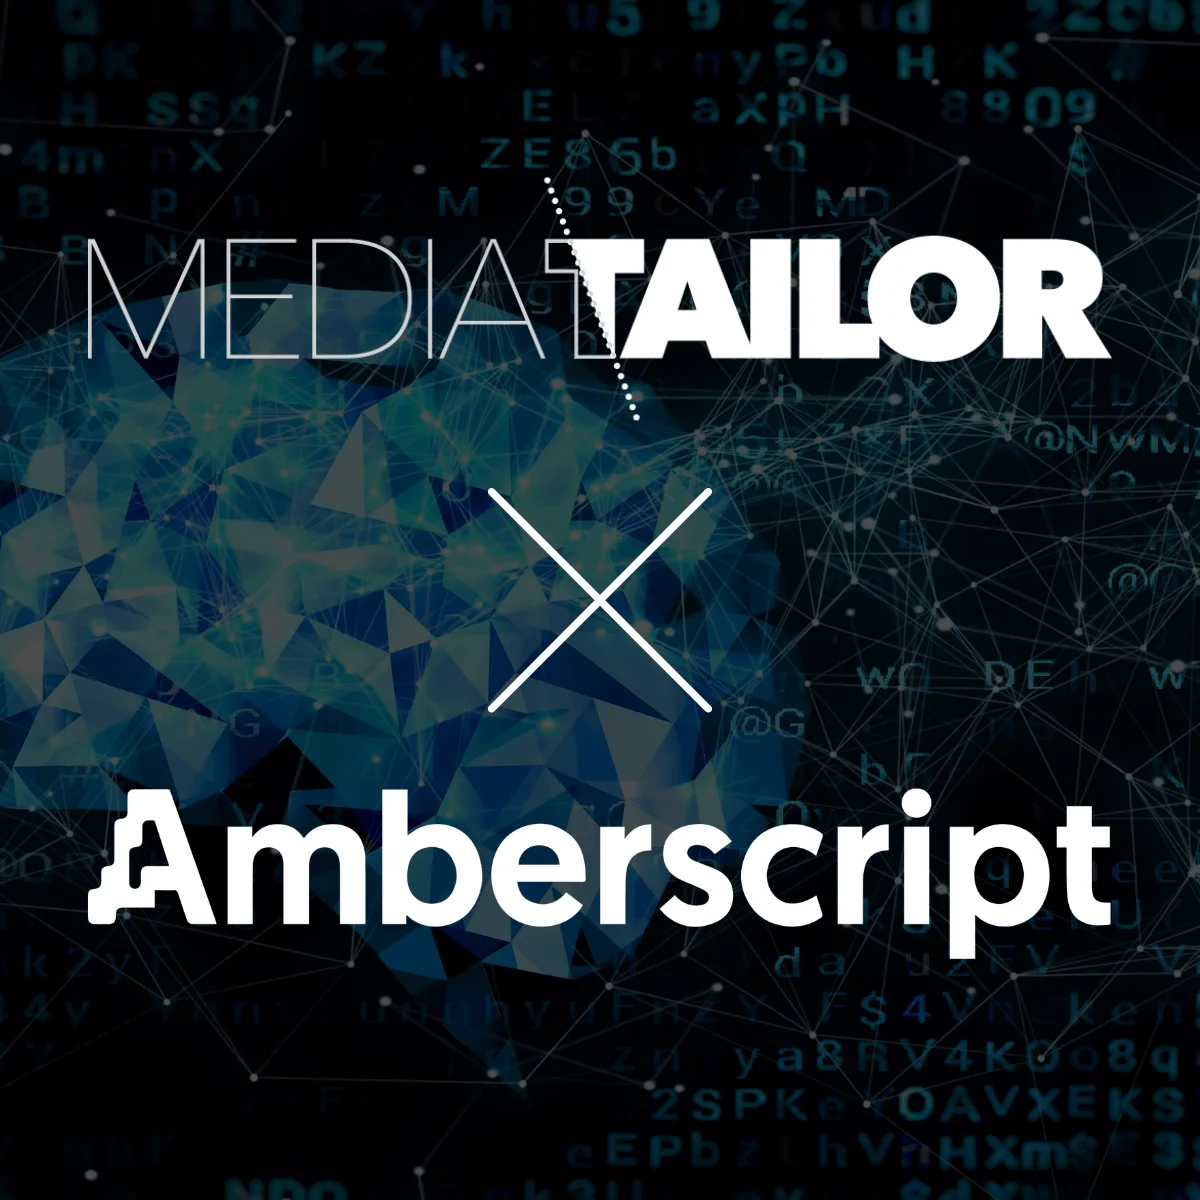 Media Tailor and Amberscript Collaborated: A Finnish Speech Recognition and Transcription Revolution!